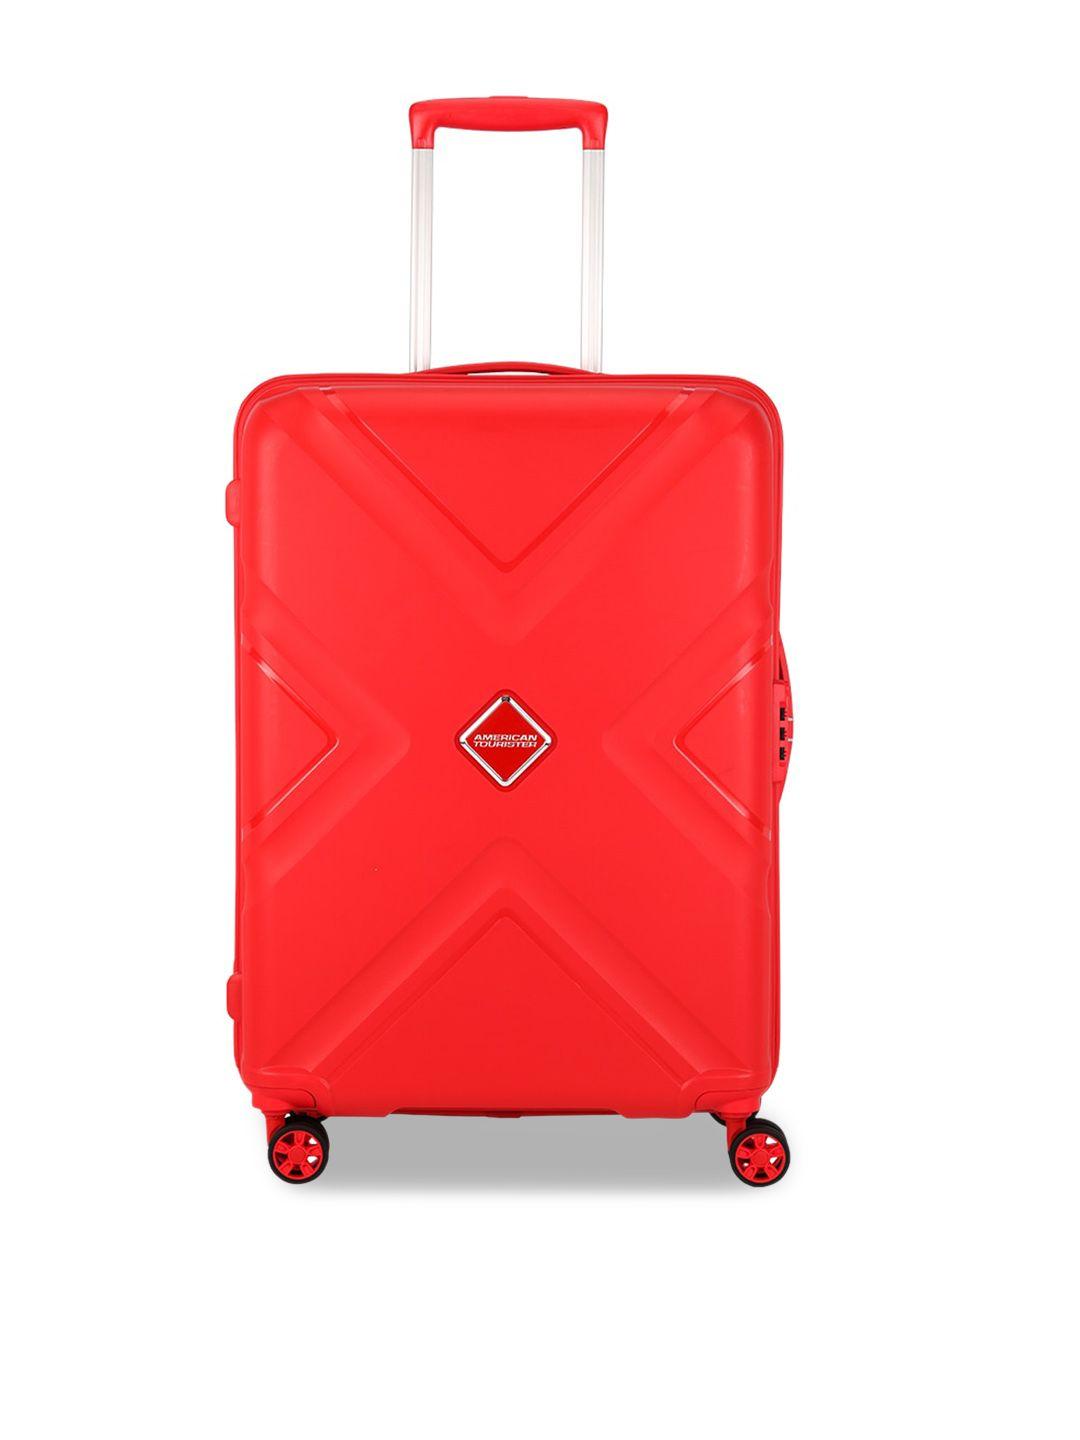 american tourister red solid hard-sided large trolley suitcase